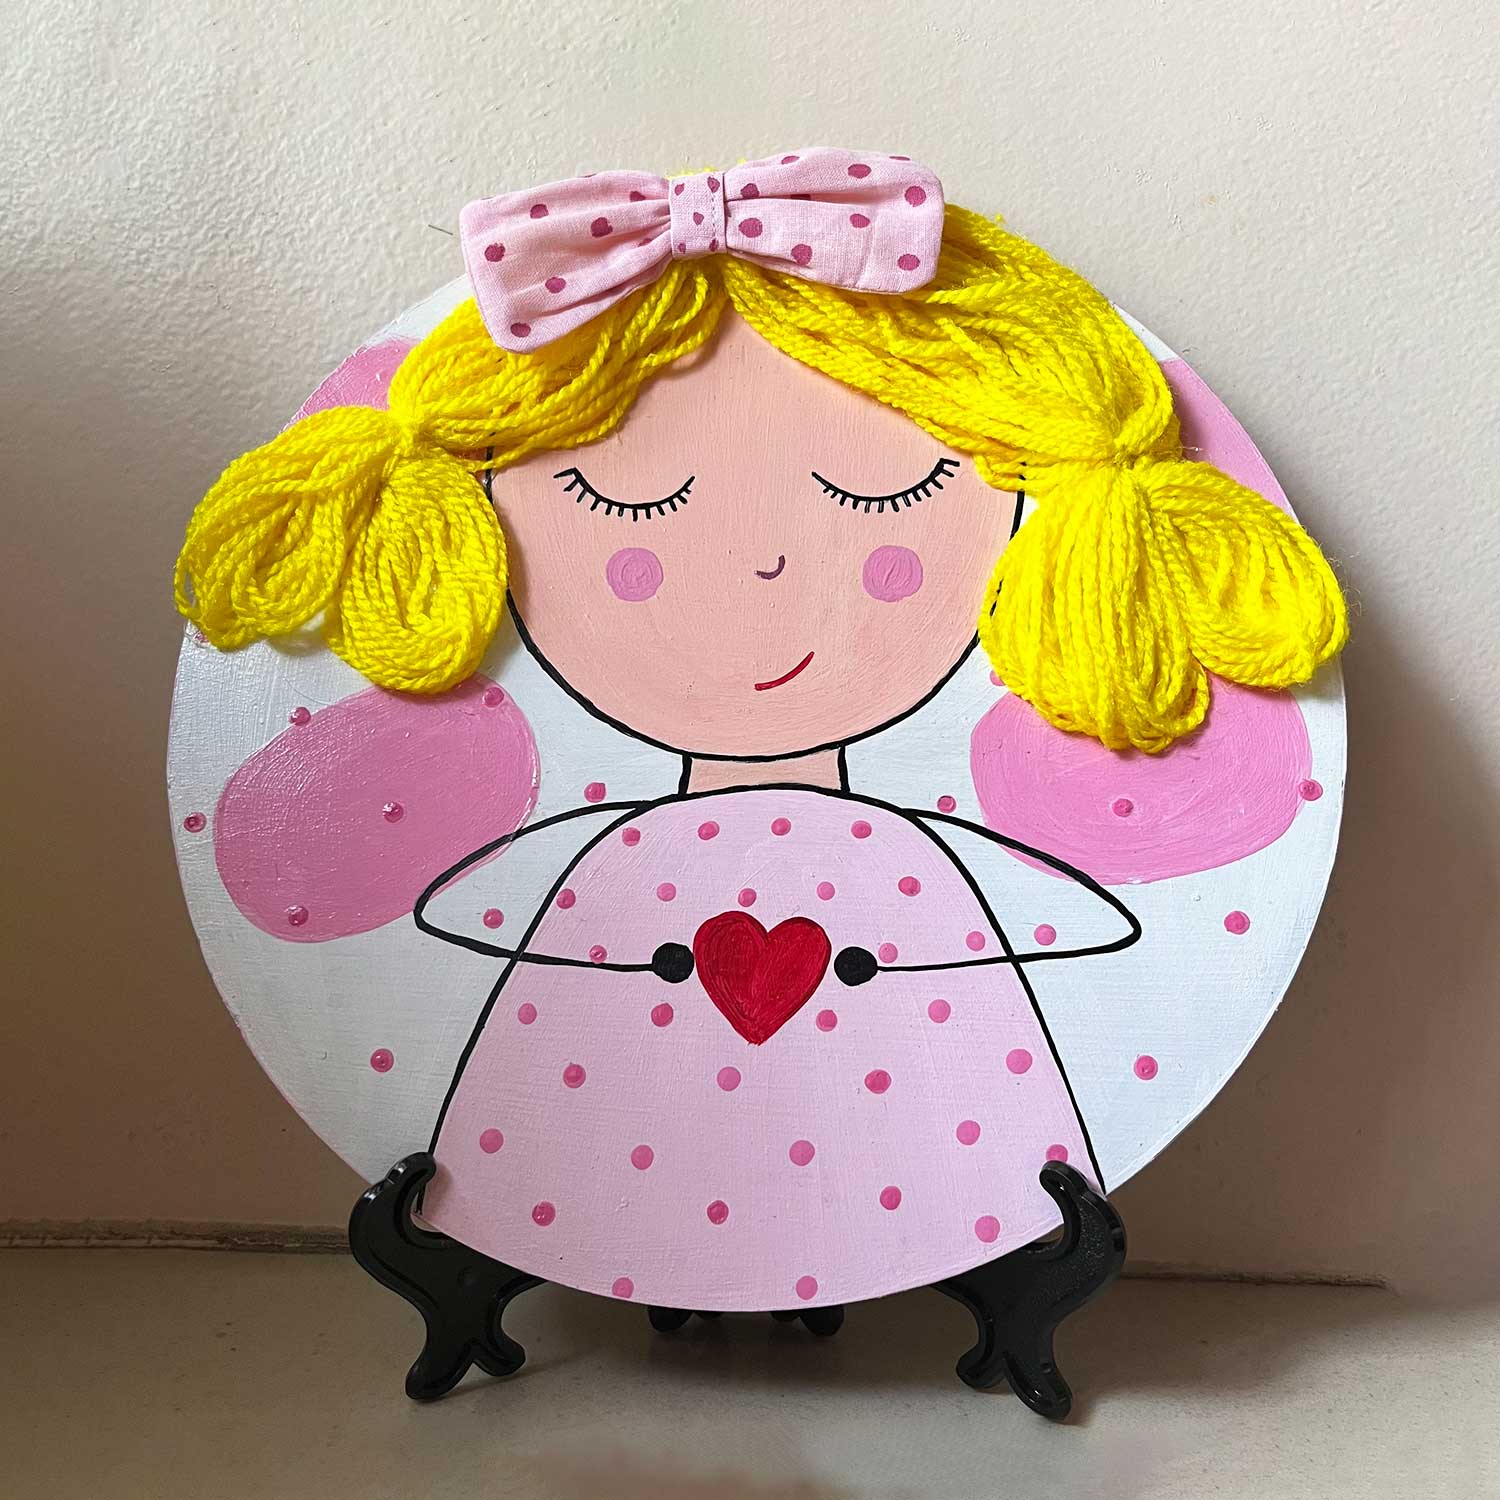 Cute Lovable Hand Painted Kid Decorative Wall Plate (Diameter - 10 inches)